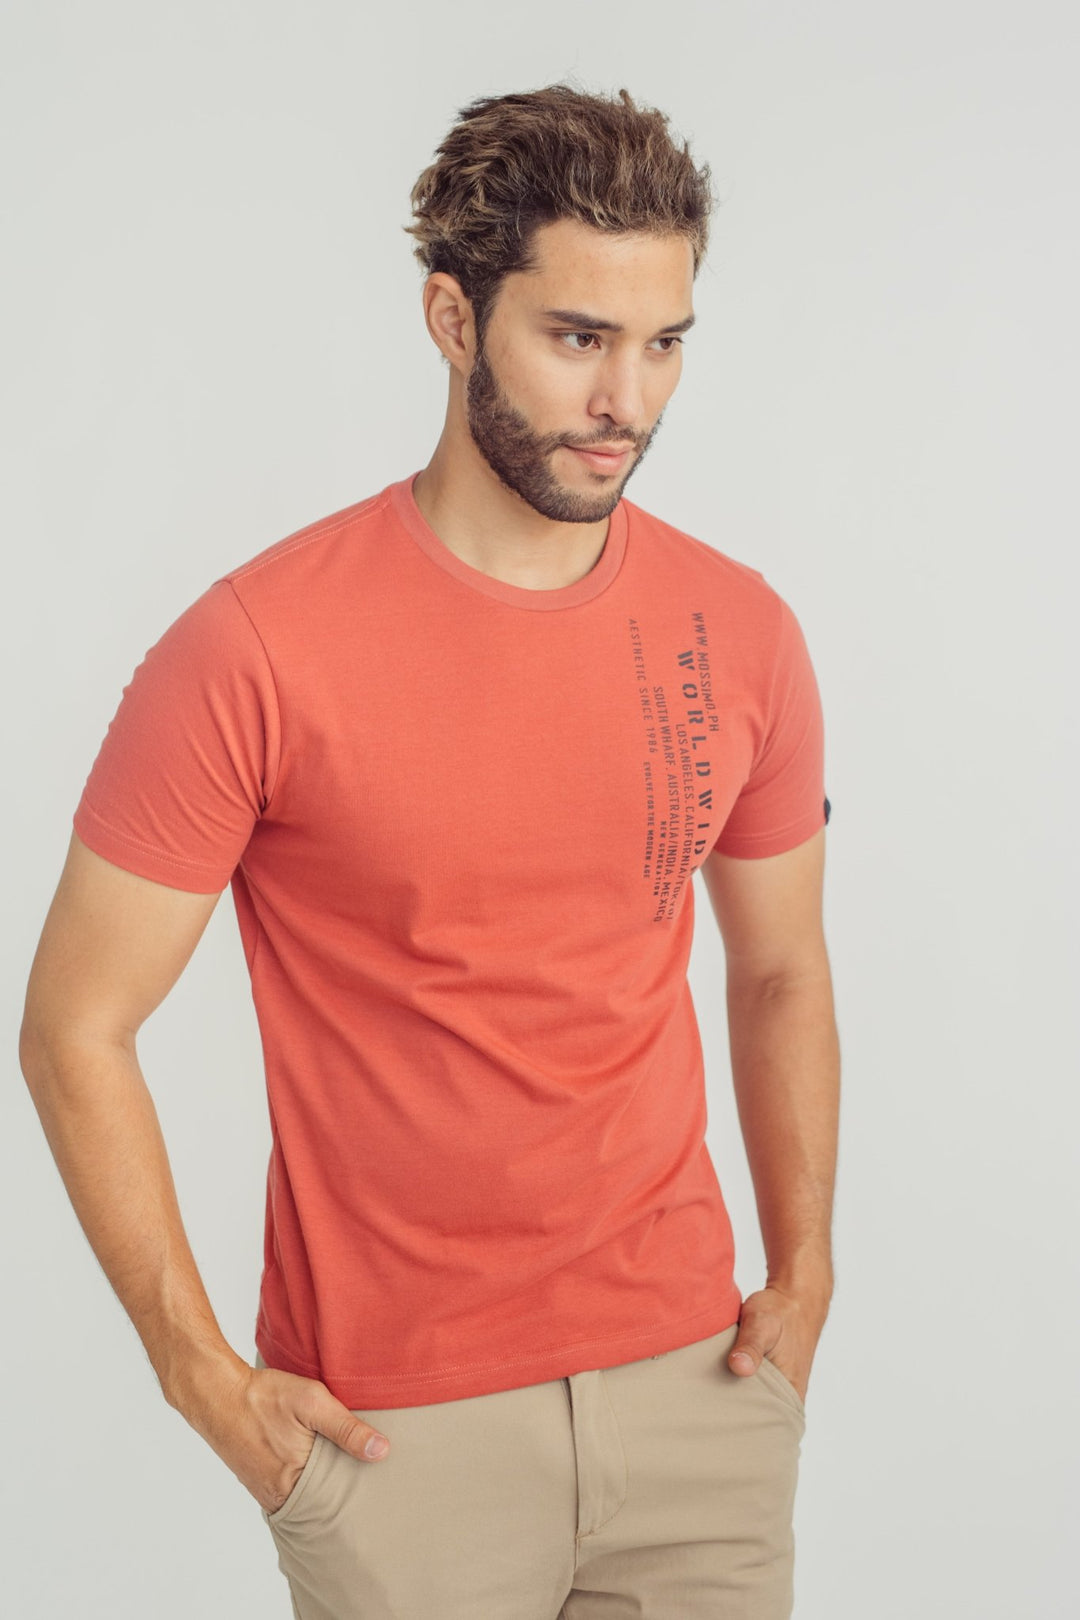 Muscle Fit Tee with Flat Print - Mossimo PH